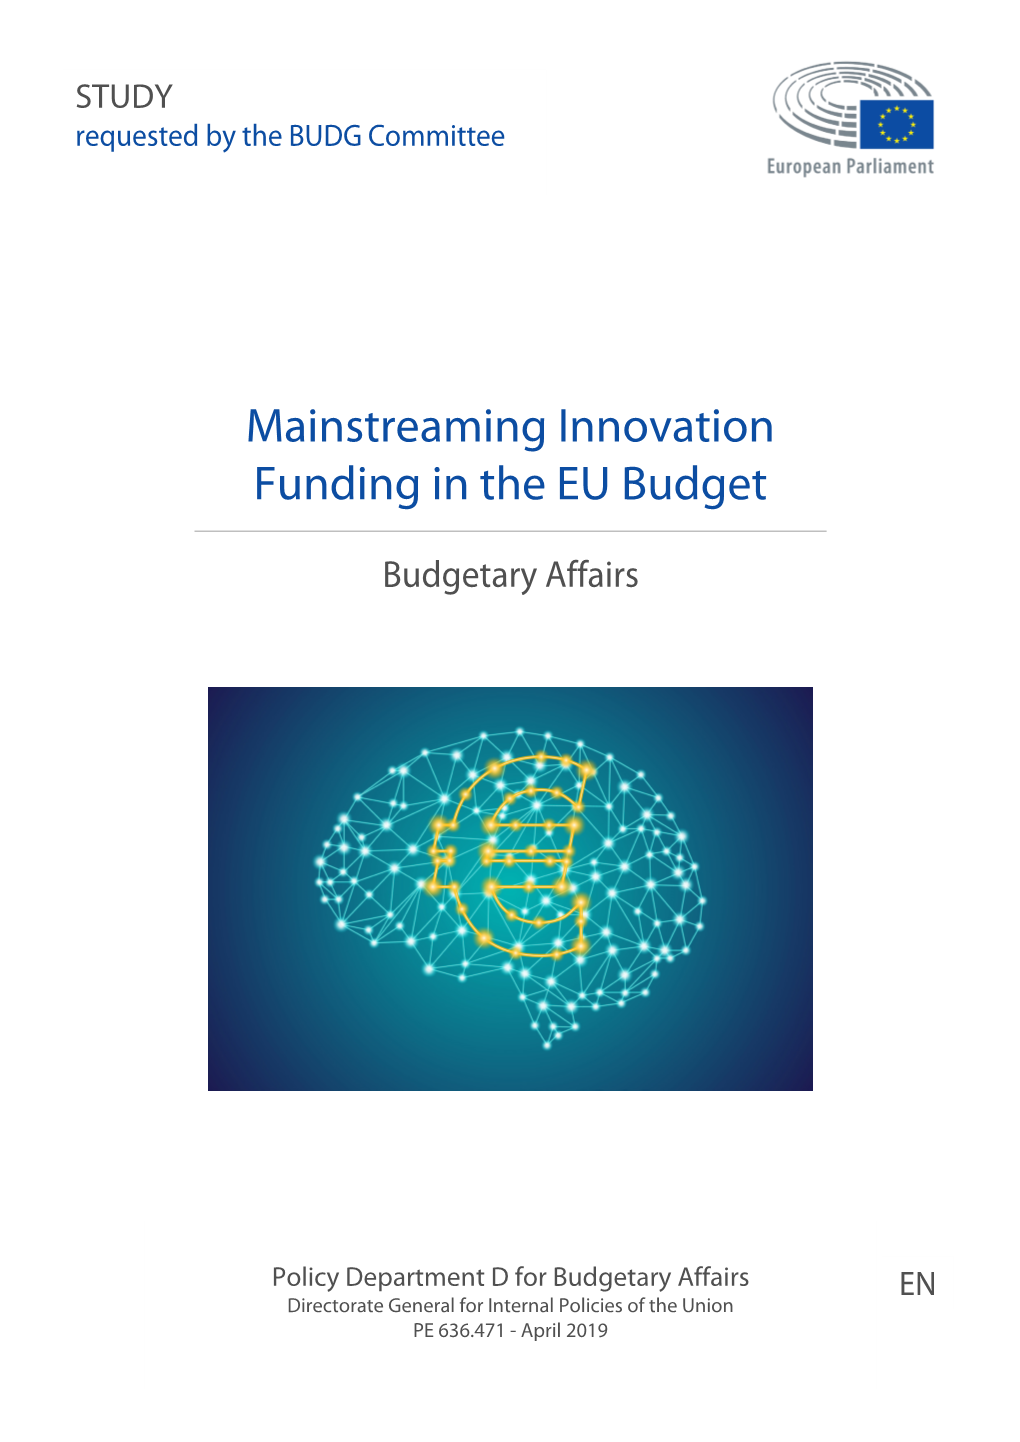 Mainstreaming Innovation Funding in the EU Budget